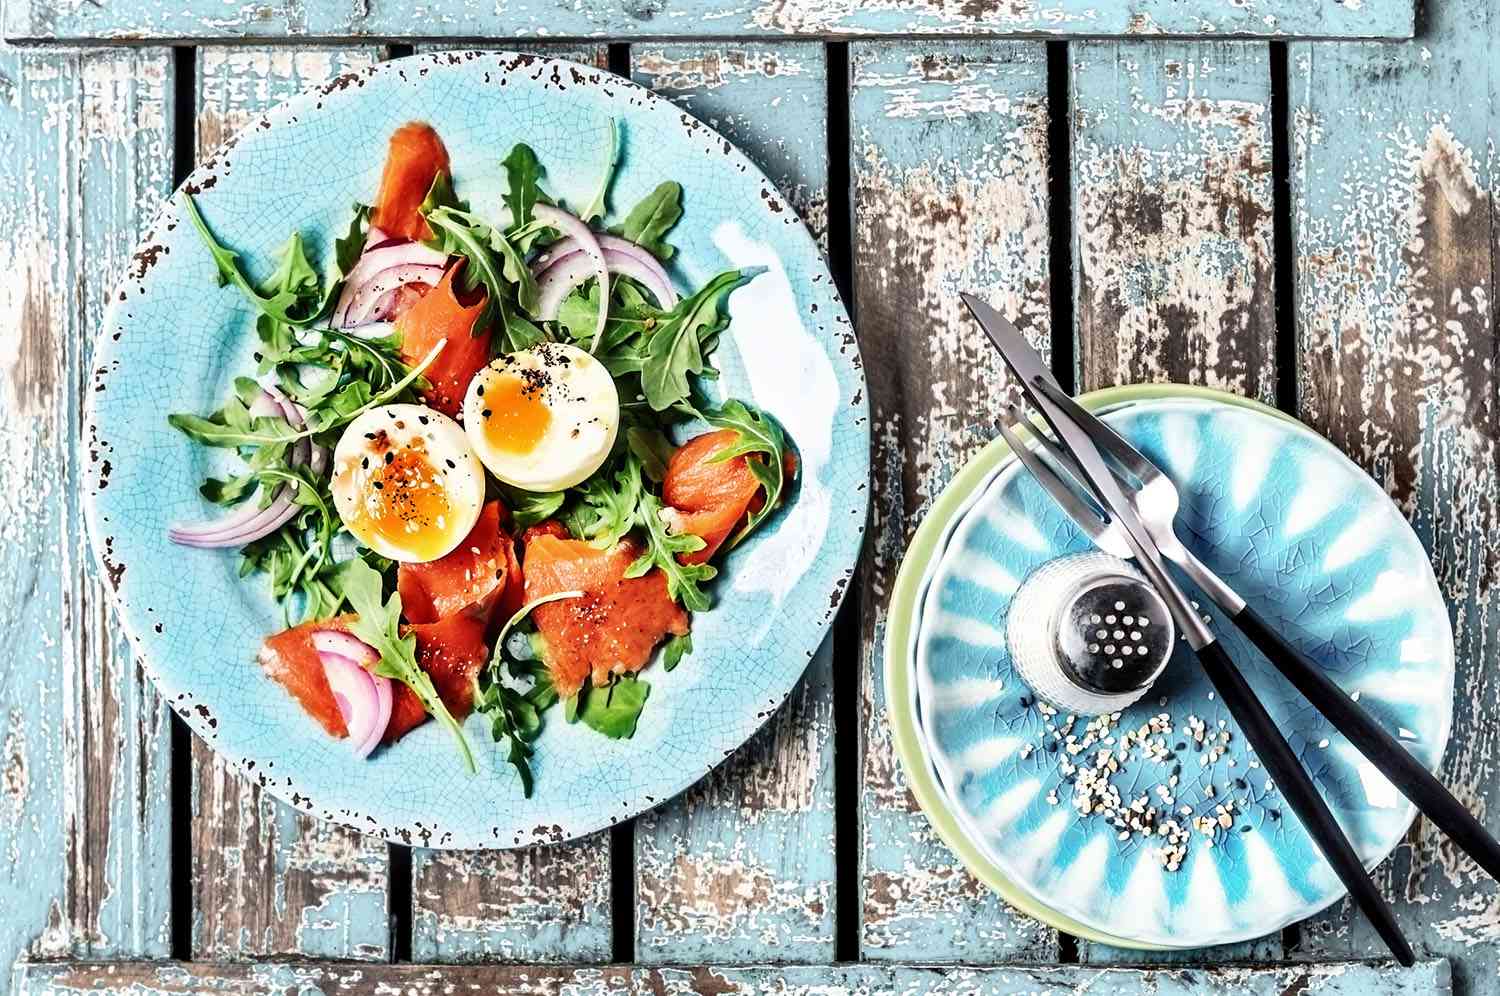 Arugula salad with smoked salmon, red onion and boiled eggs on wooden, blue background